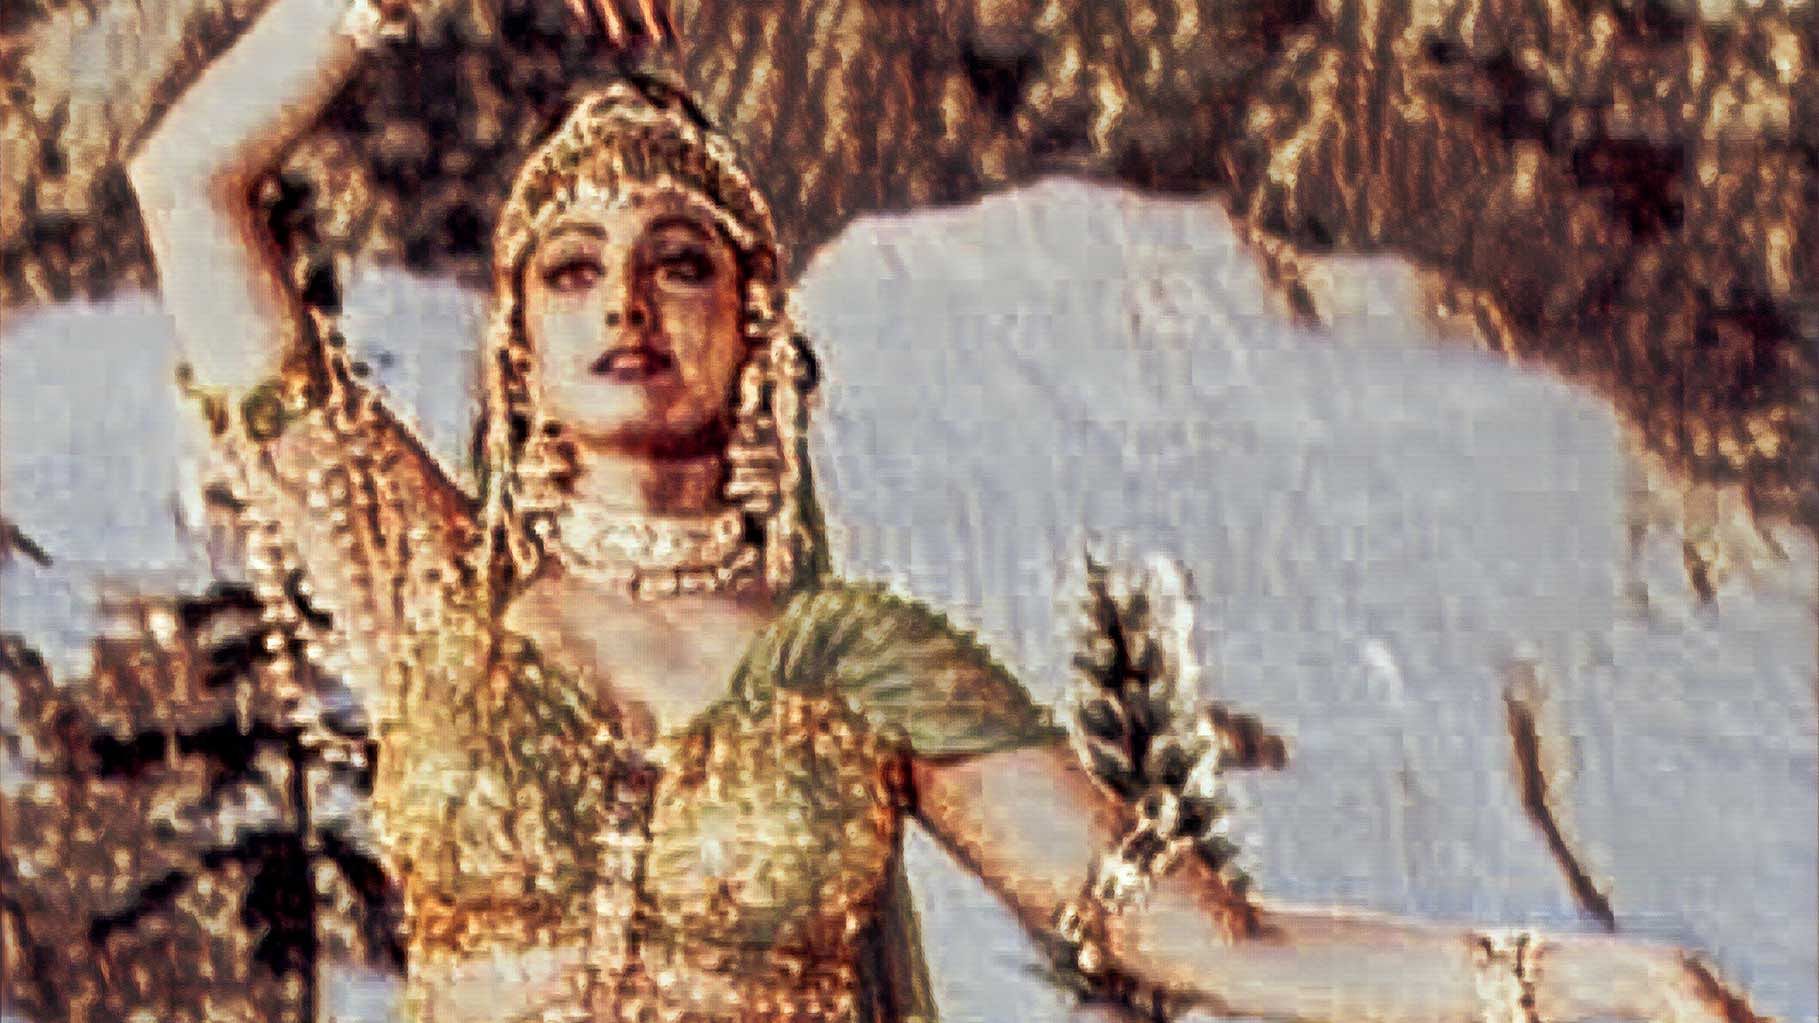 Sridevi was the  goddess of Tamil and Telugu cinema from the late 70s to the early 90s.